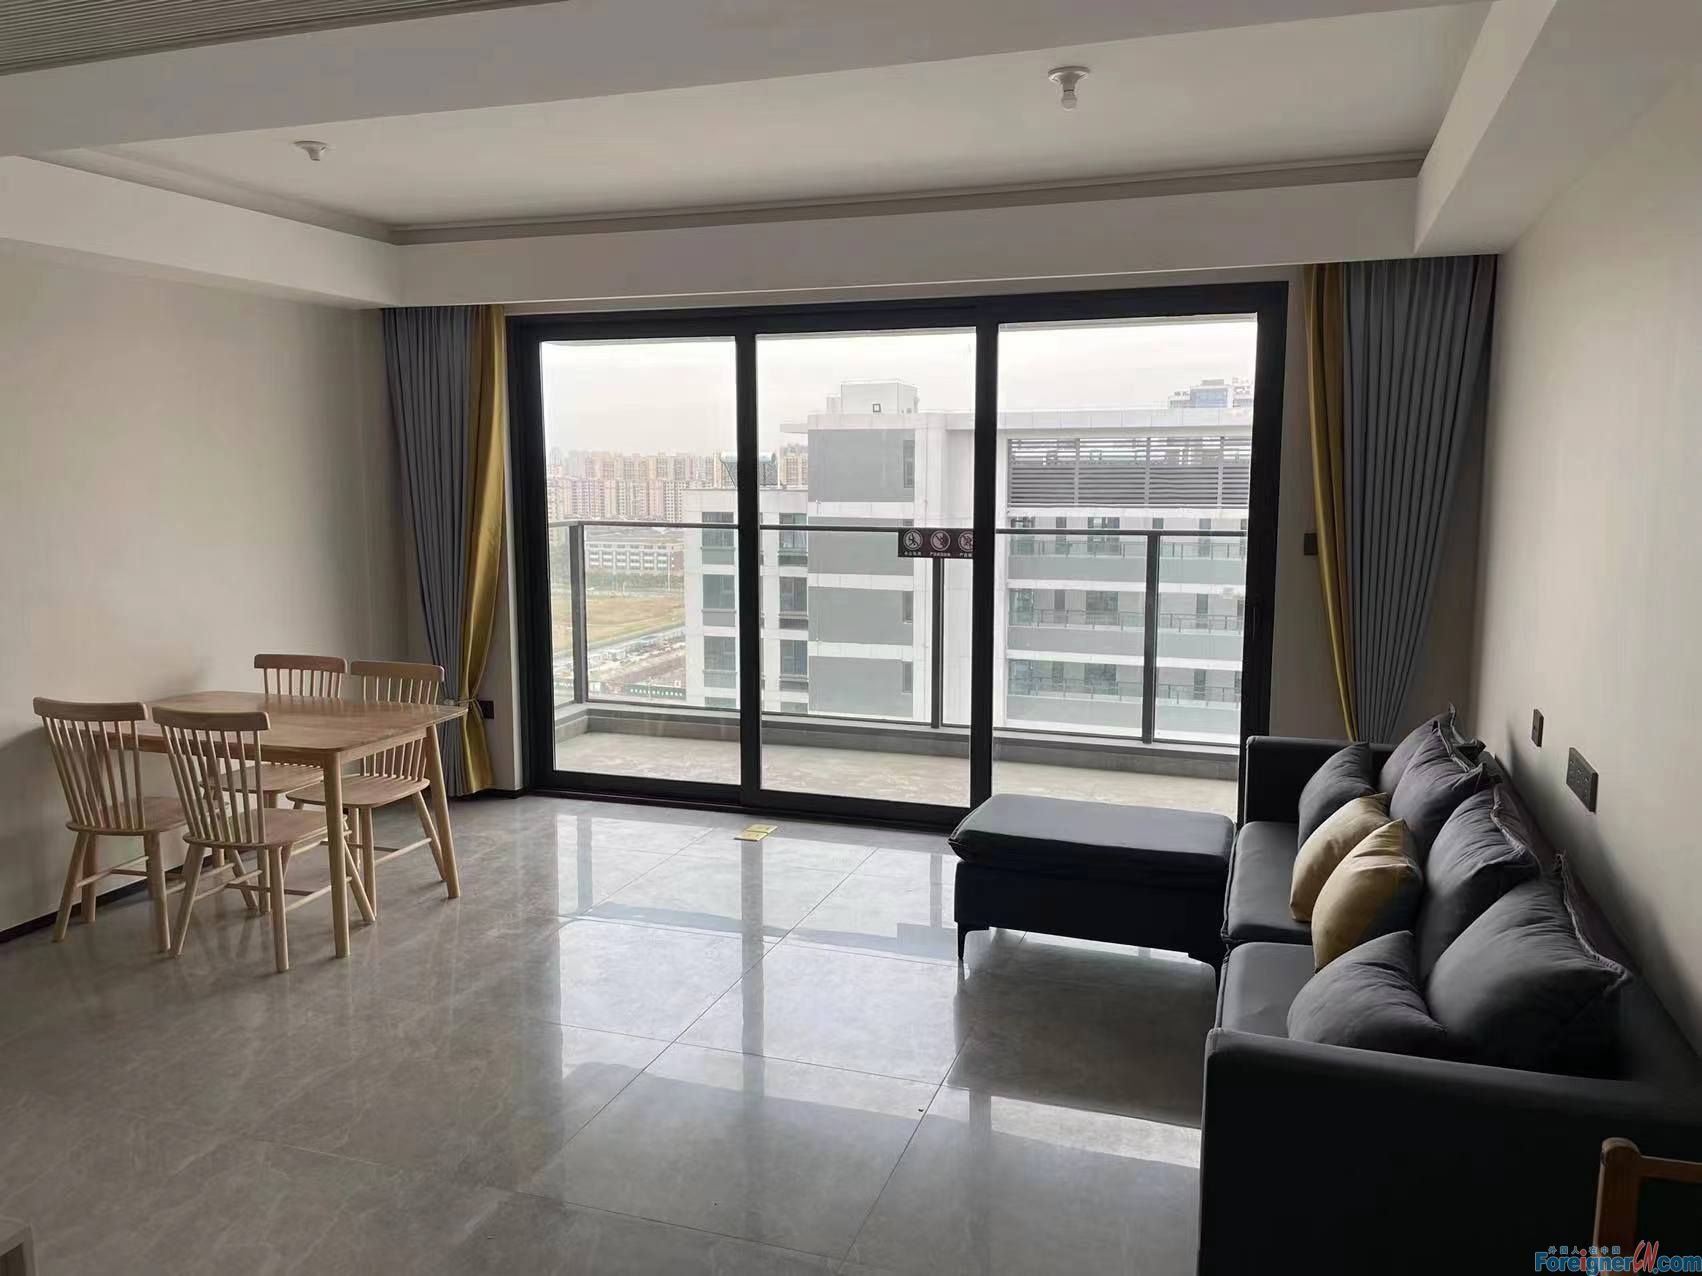 Gorgeous!! 1st time house for rent in XiangCheng/Suzhou /3rooms 2baths/Brand New/Lots of light, New furniture/Suzhou Foreign Language school Xiangcheng Campus/Nearby Mountain Kingston Bilingual School